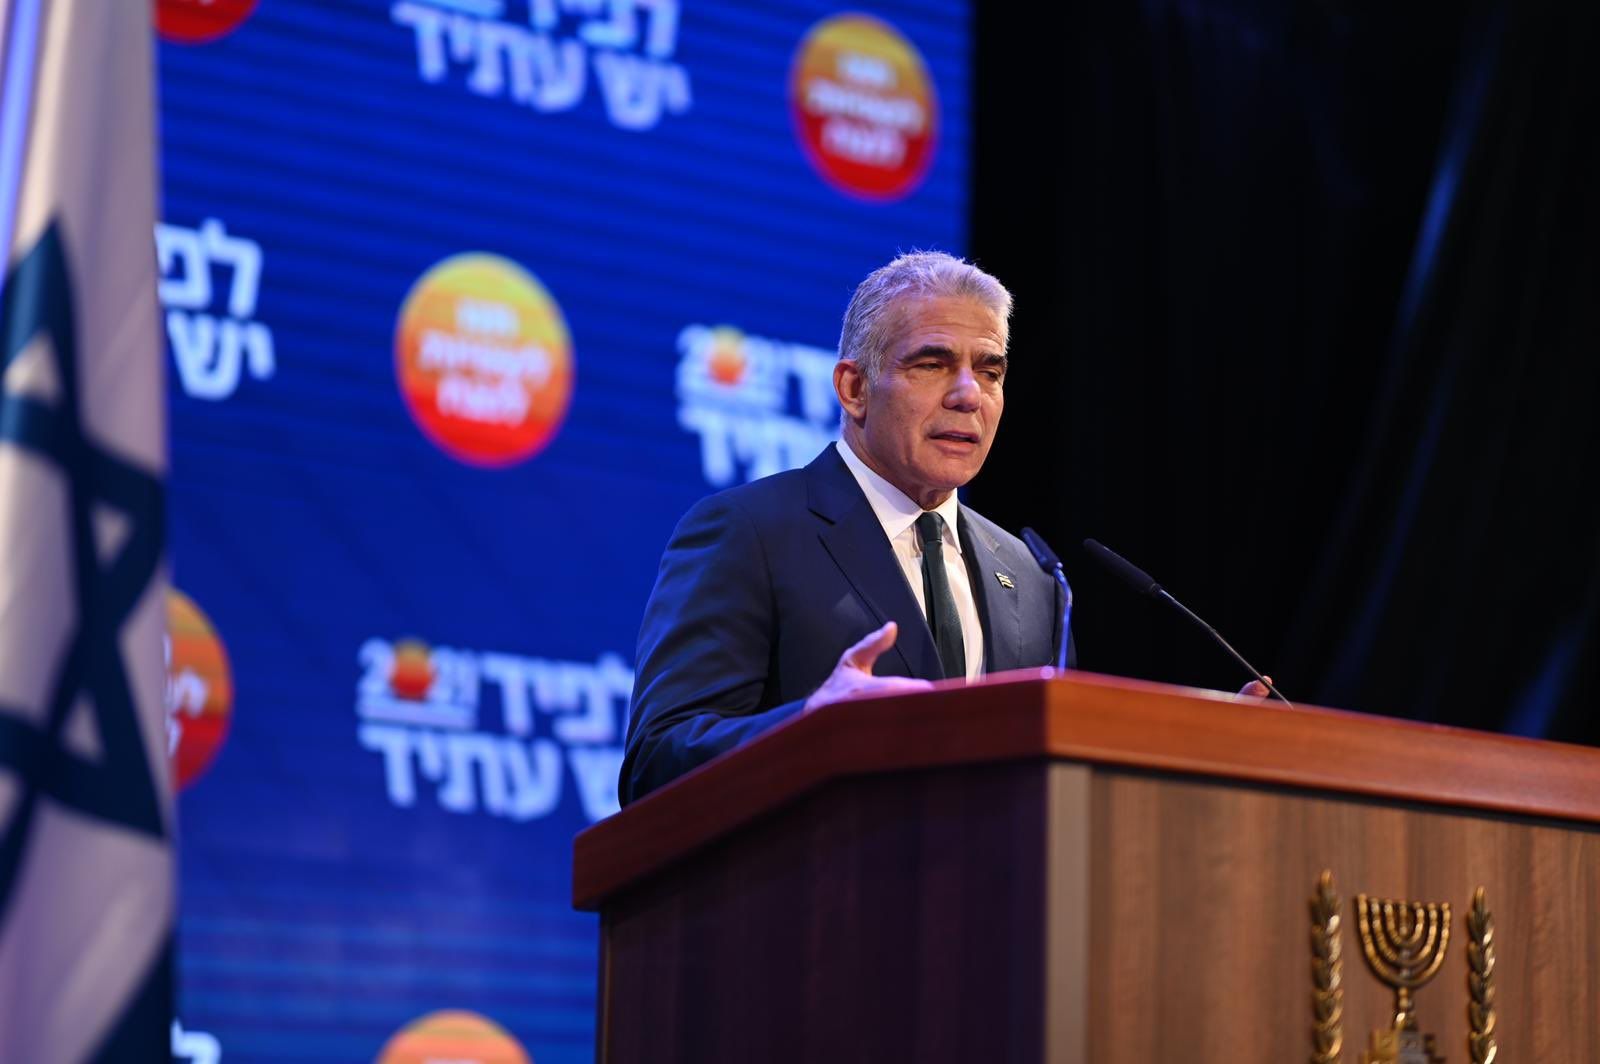 Yair Lapid, former news anchor who may become Israel’s next prime minister